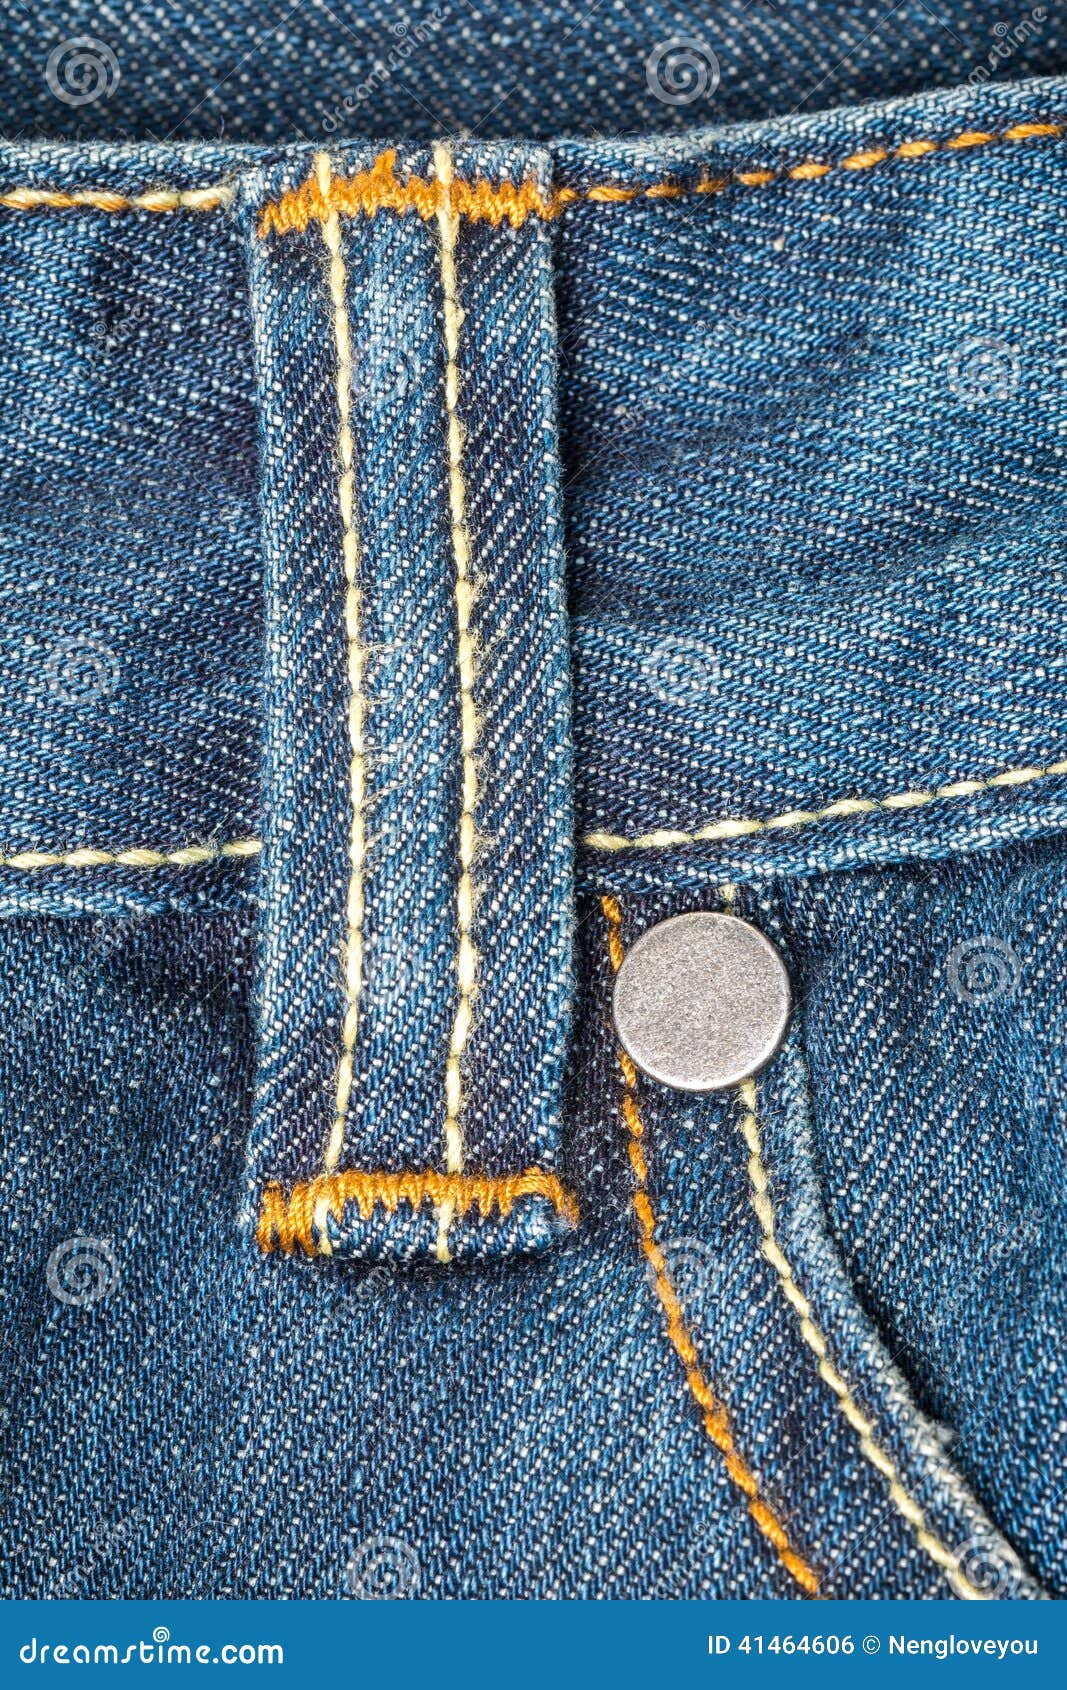 Belt loops on blue jeans stock photo. Image of closure - 41464606